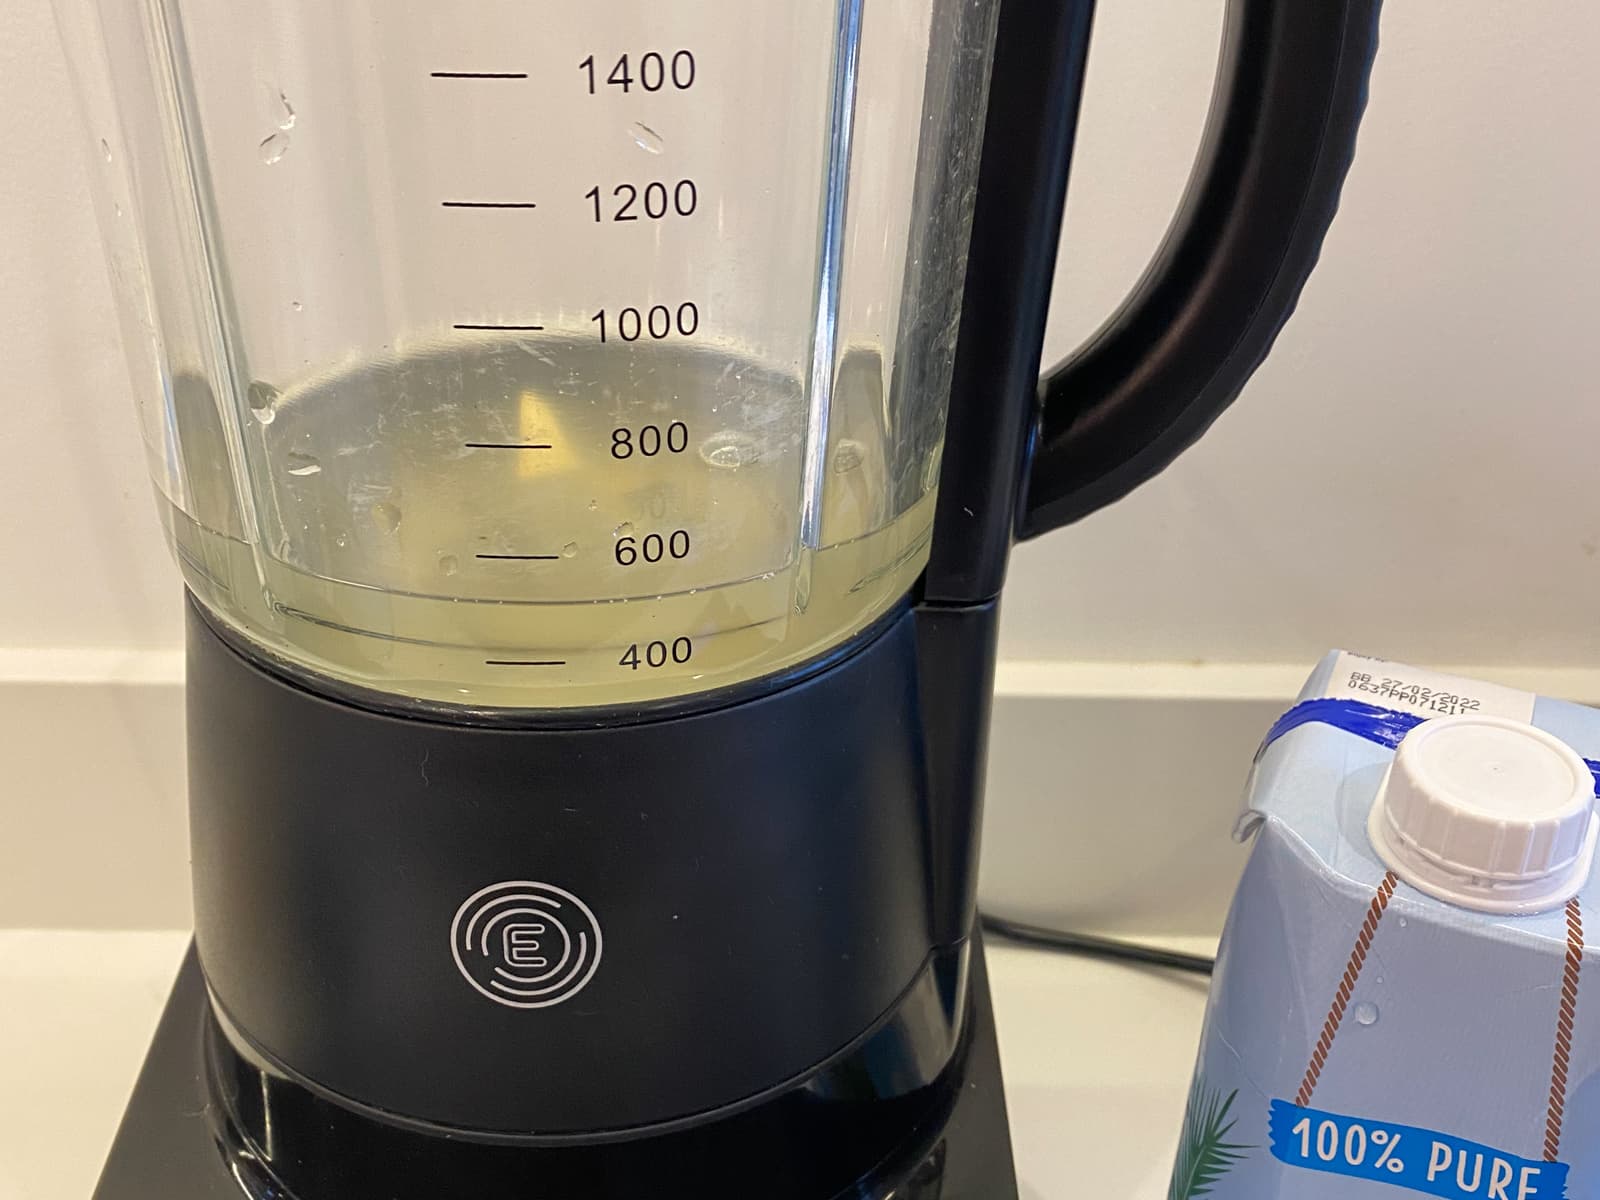 Coconut water measured into a blender to begin making a smoothie.